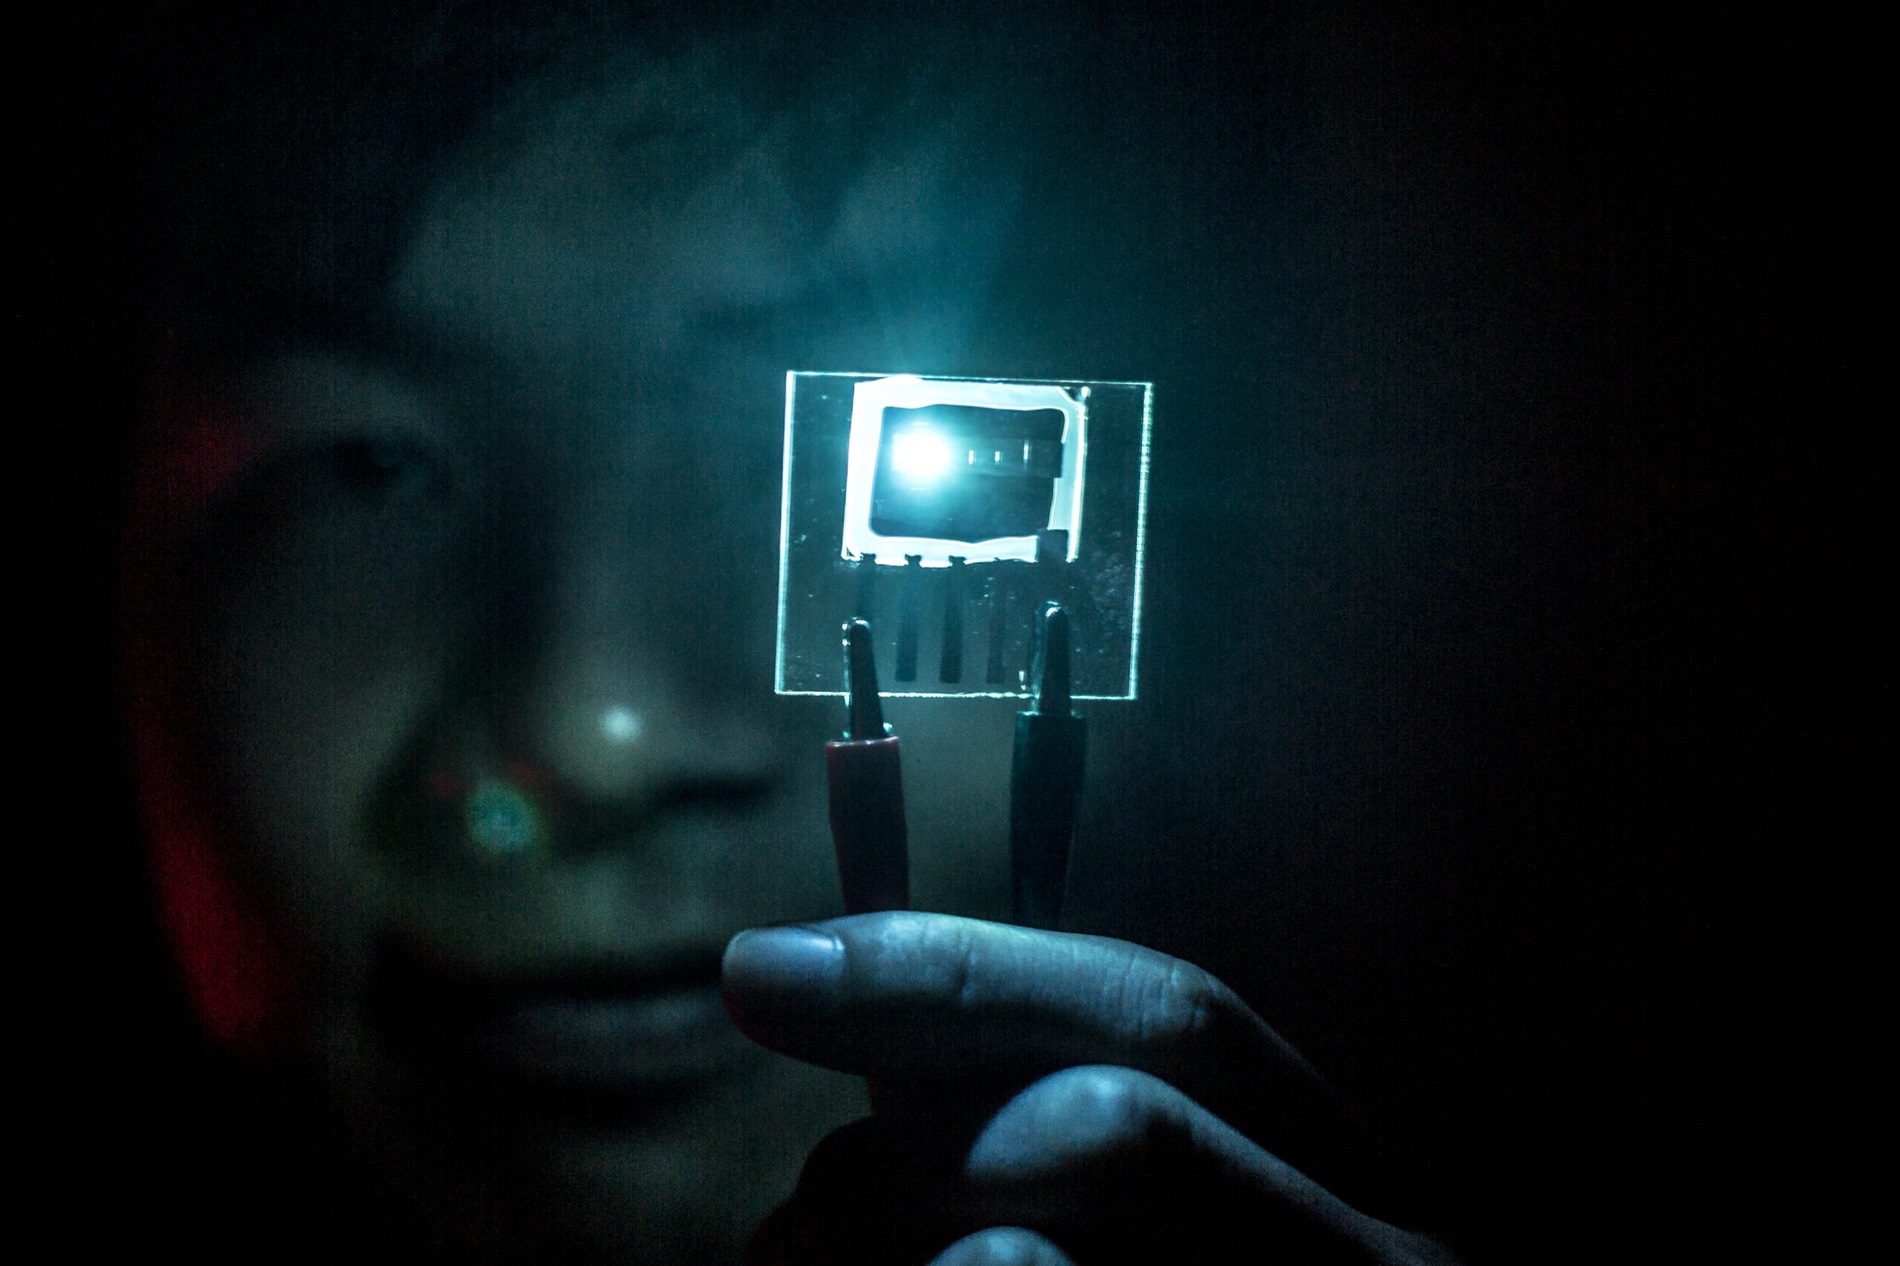 Jaesang Lee, Electrical Engineering PhD Student, demonstrates use of an earlier blue PHOLED innovation by University of Michigan professor Steve Forrest’s research group in 2014. Forrest’s lab introduced PHOLEDs to the world in the early 2000s and has been trying to improve the lifetime of blue PHOLEDs ever since.